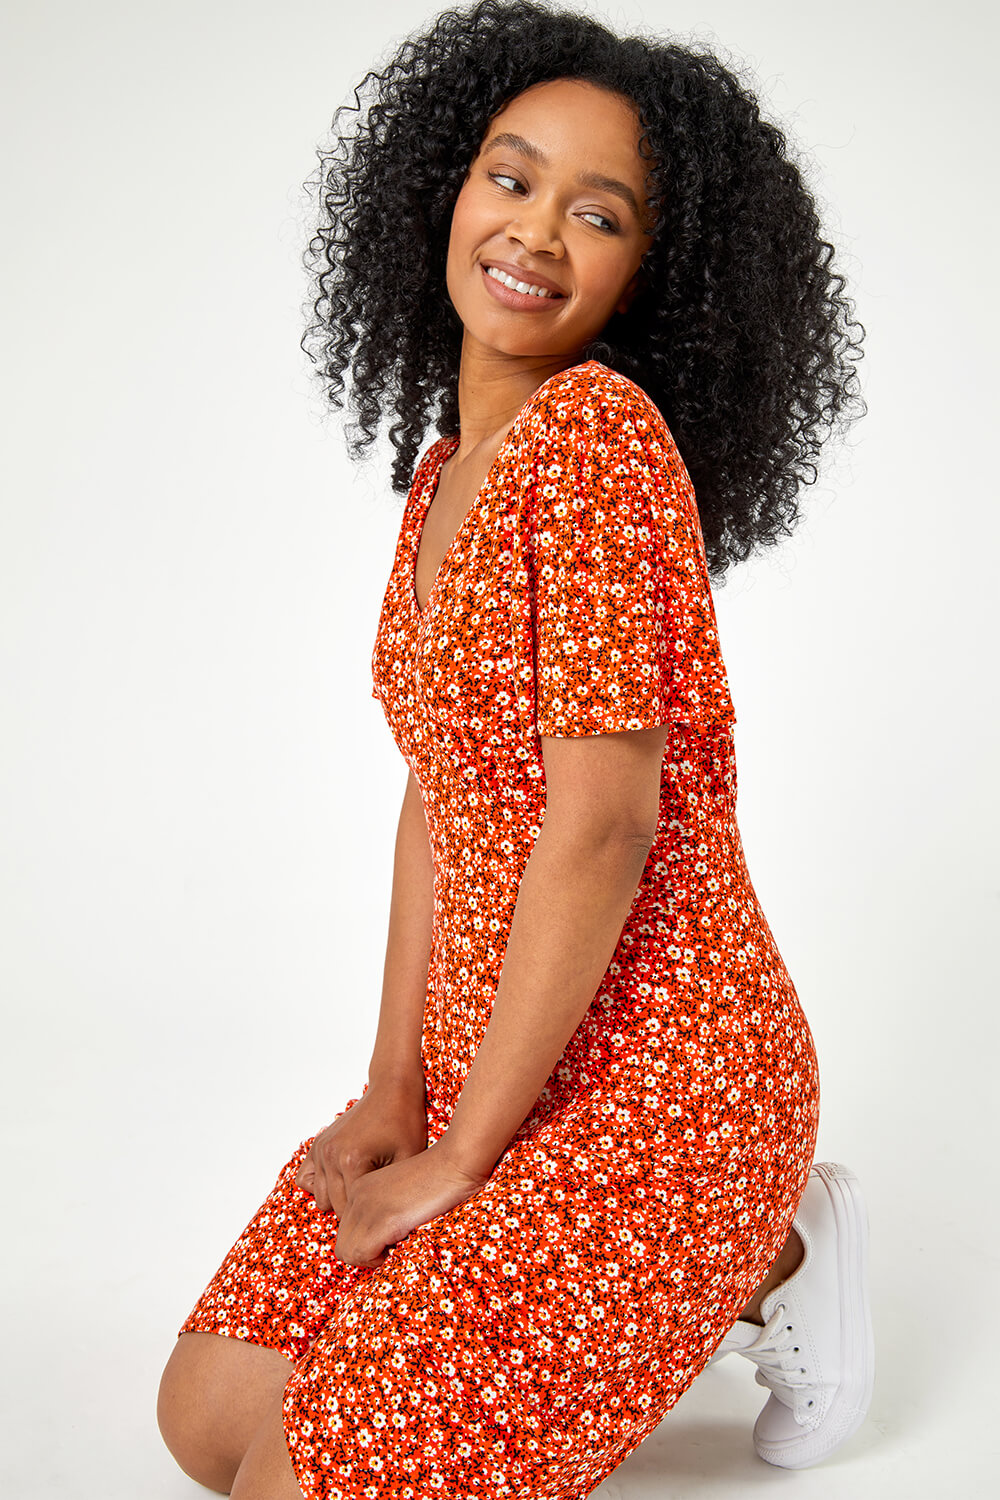 Red Petite Floral Print Stretch Jersey Dress, Image 5 of 5